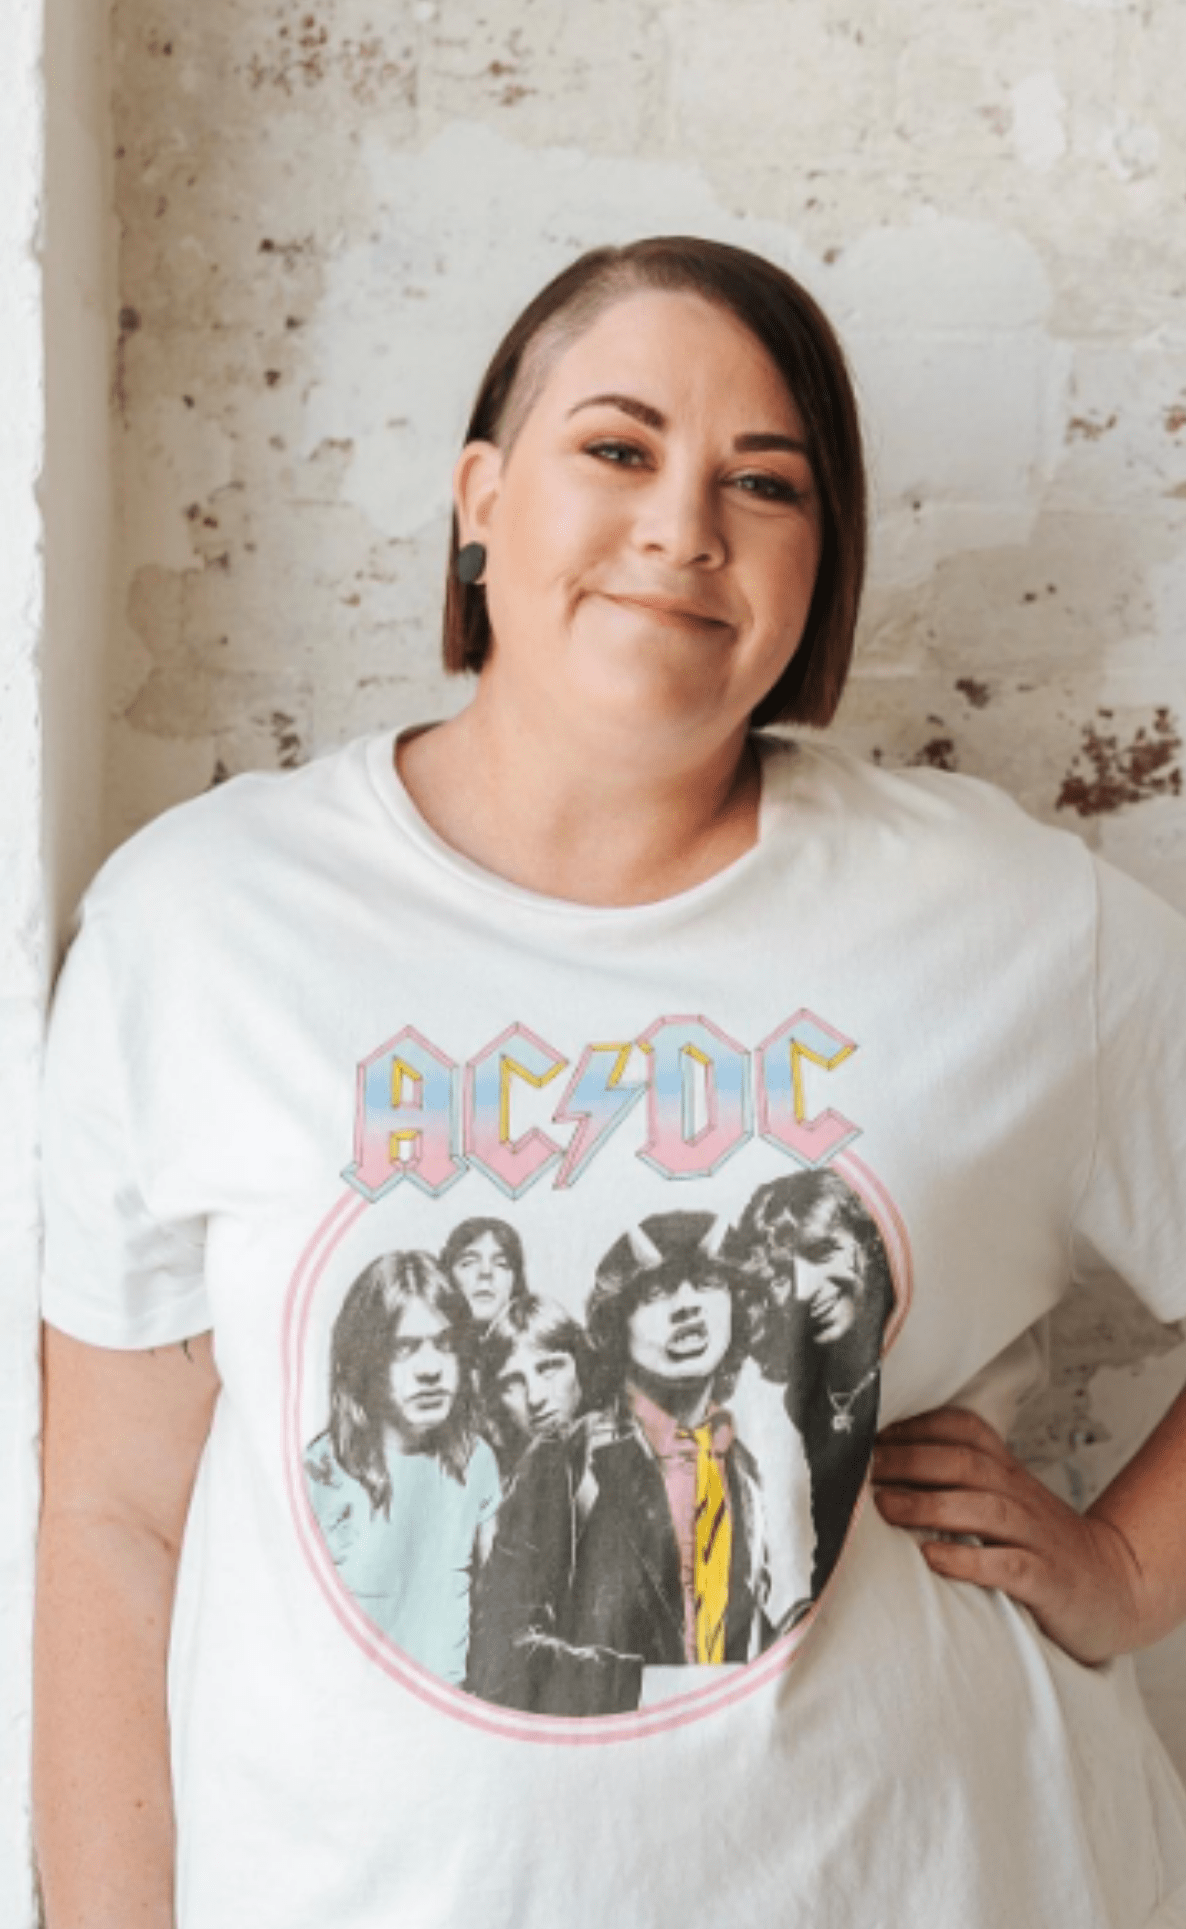 White woman in cool ACDC tshirt